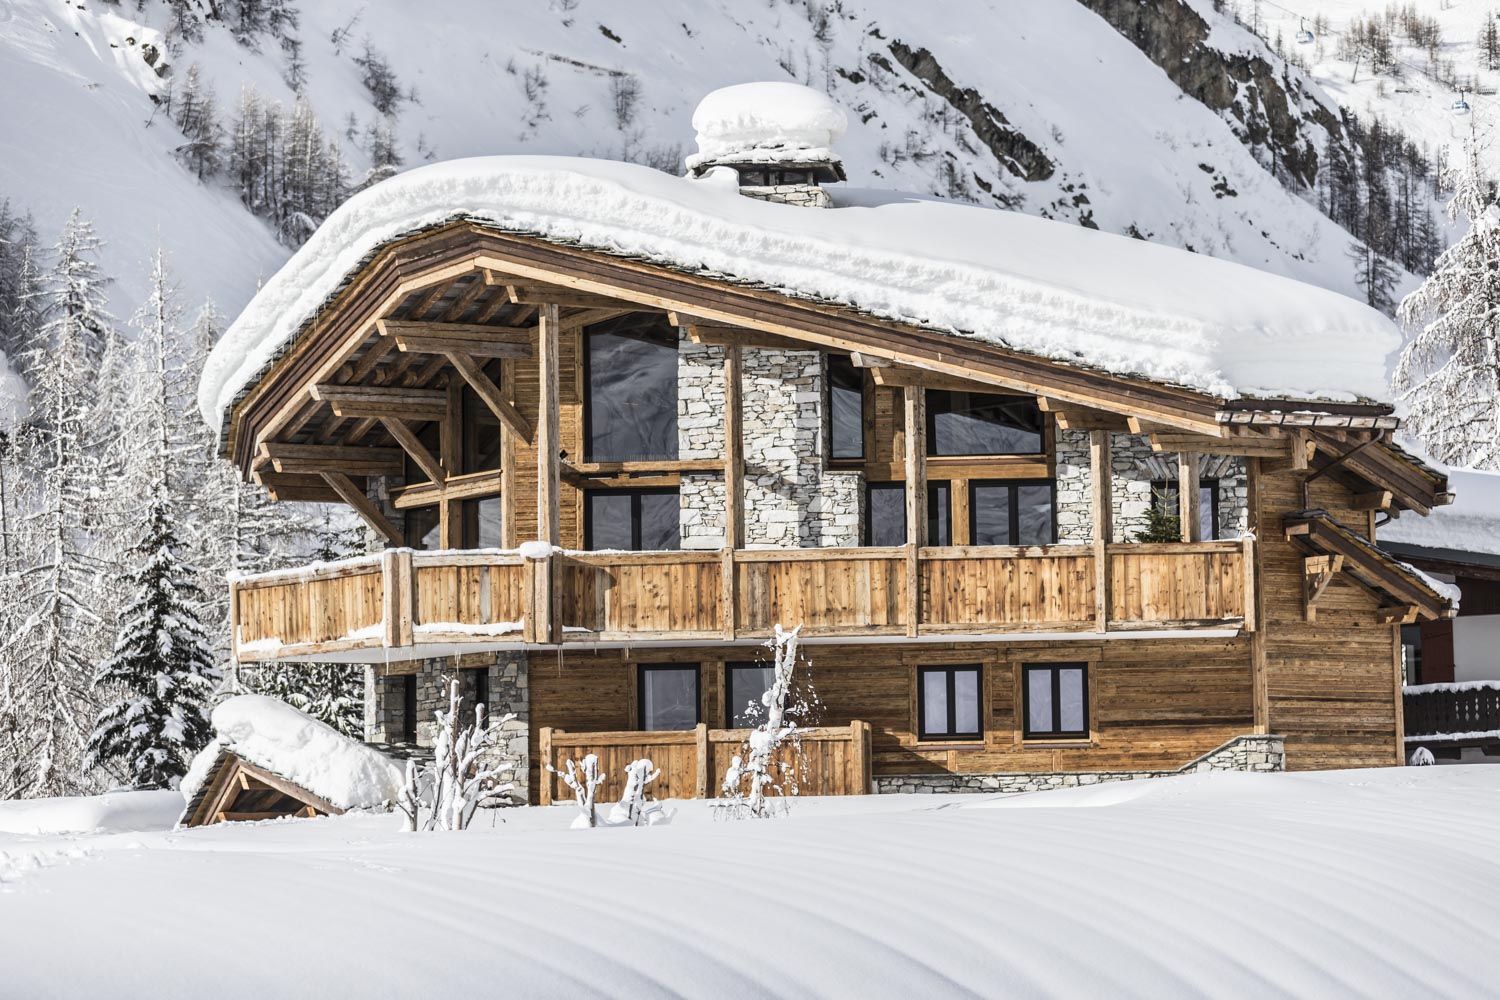 Chalet Daria - Luxury Chalet - HipHideouts - Snow - Snowy Chalet - Winter